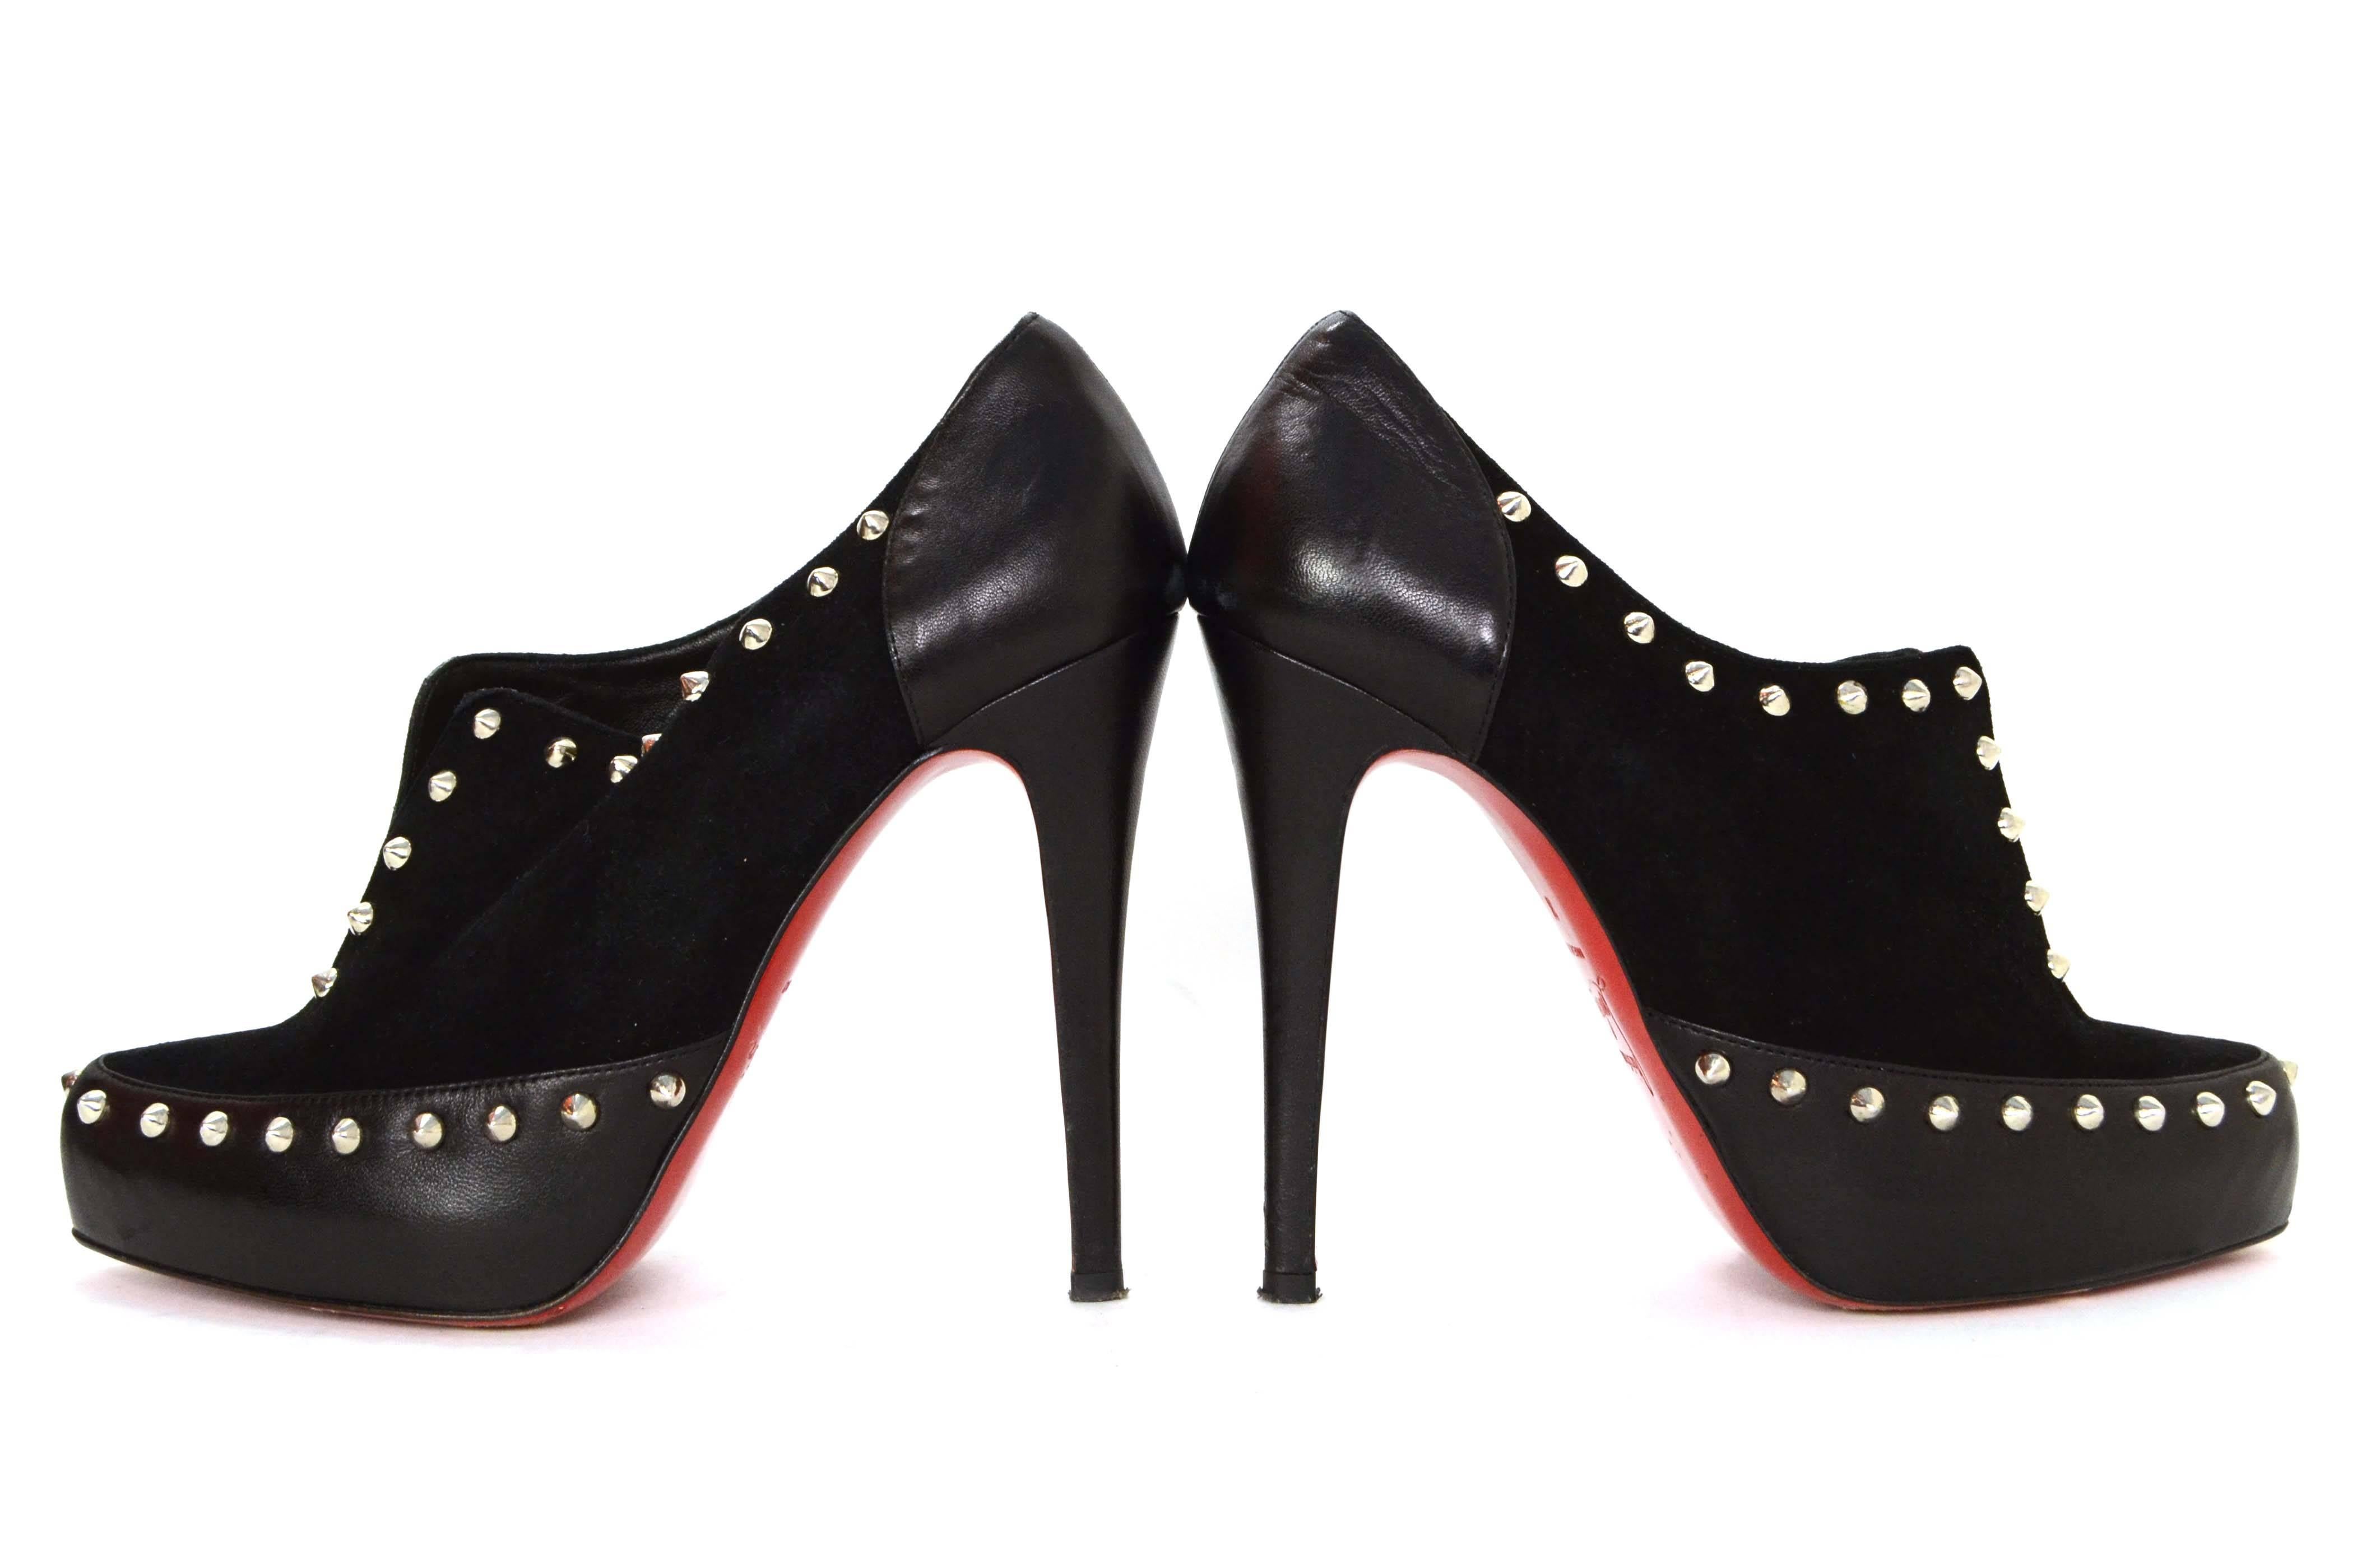 Christian Louboutin Black Suede & Leather Booties With Studs sz. 38 2